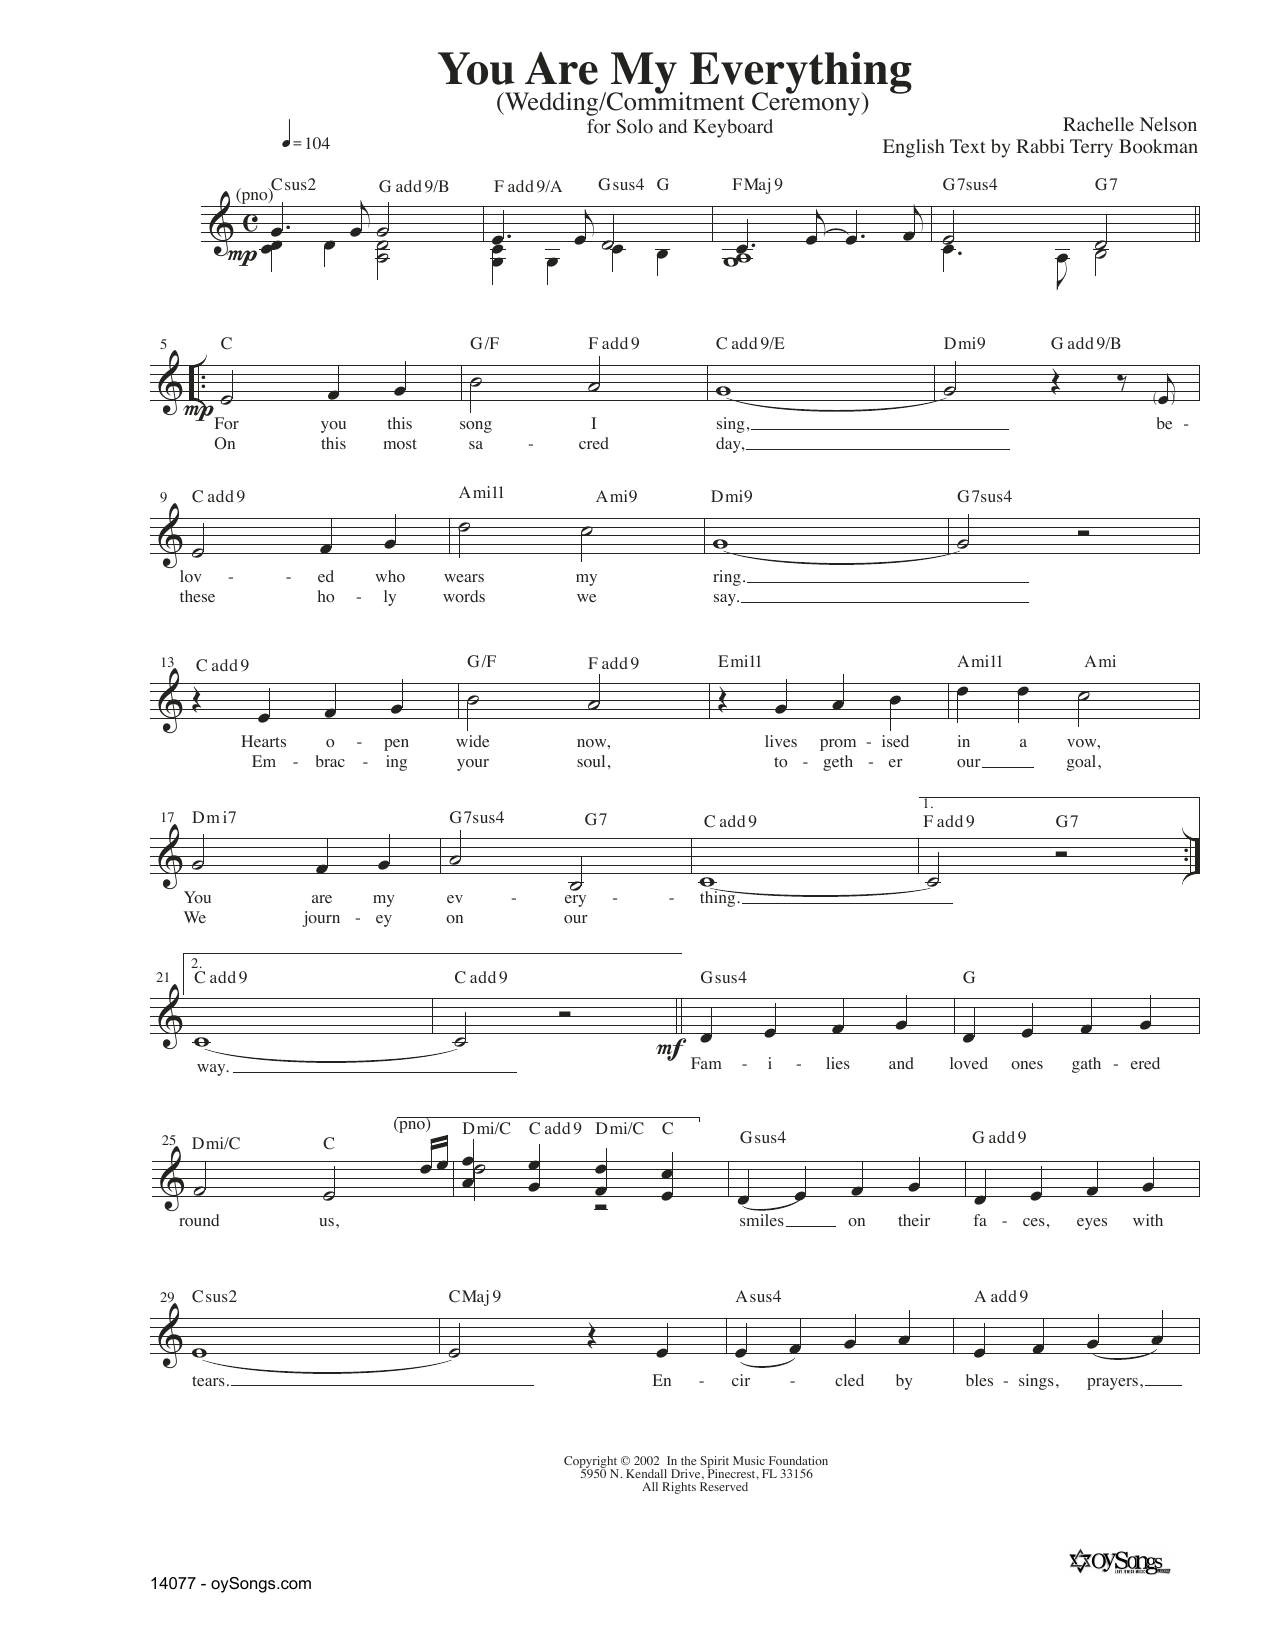 Download Rachelle Nelson You Are My Everything Sheet Music